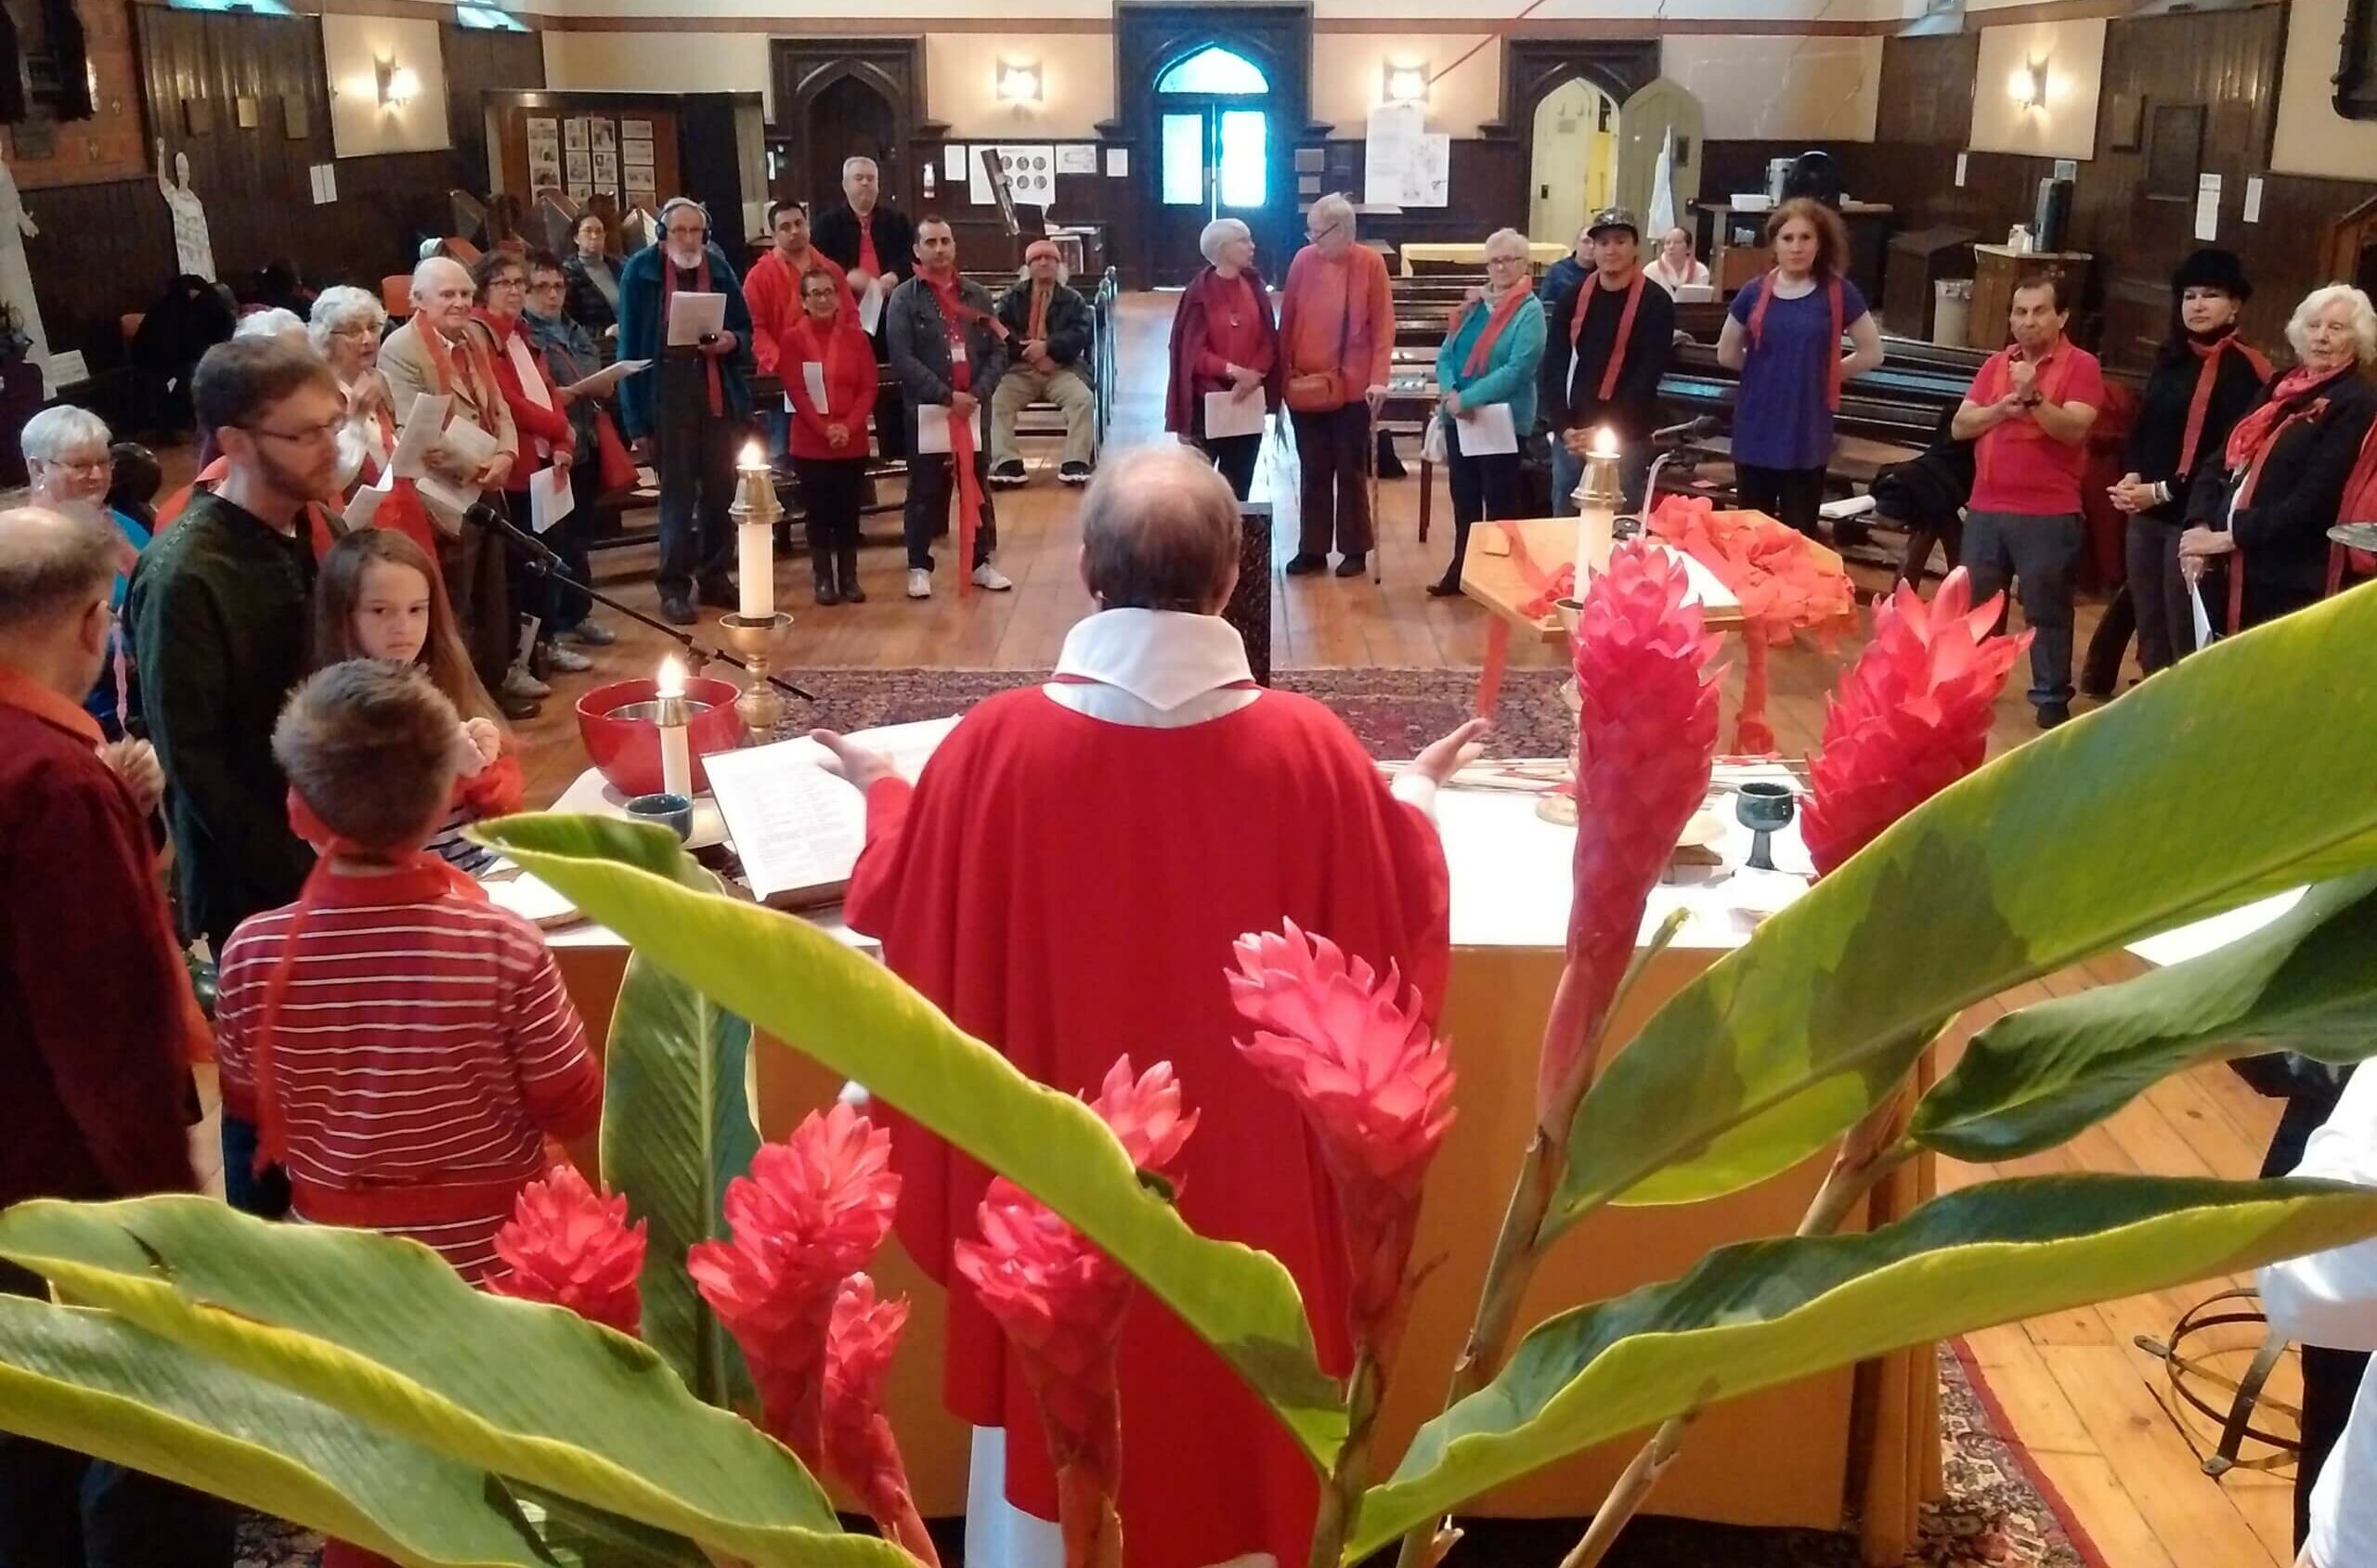 A man in a red cope has his back to the camera. He faces a congregation of people gathered to celebrate Pentecost. The image is taken through a bouquet of red flowers.